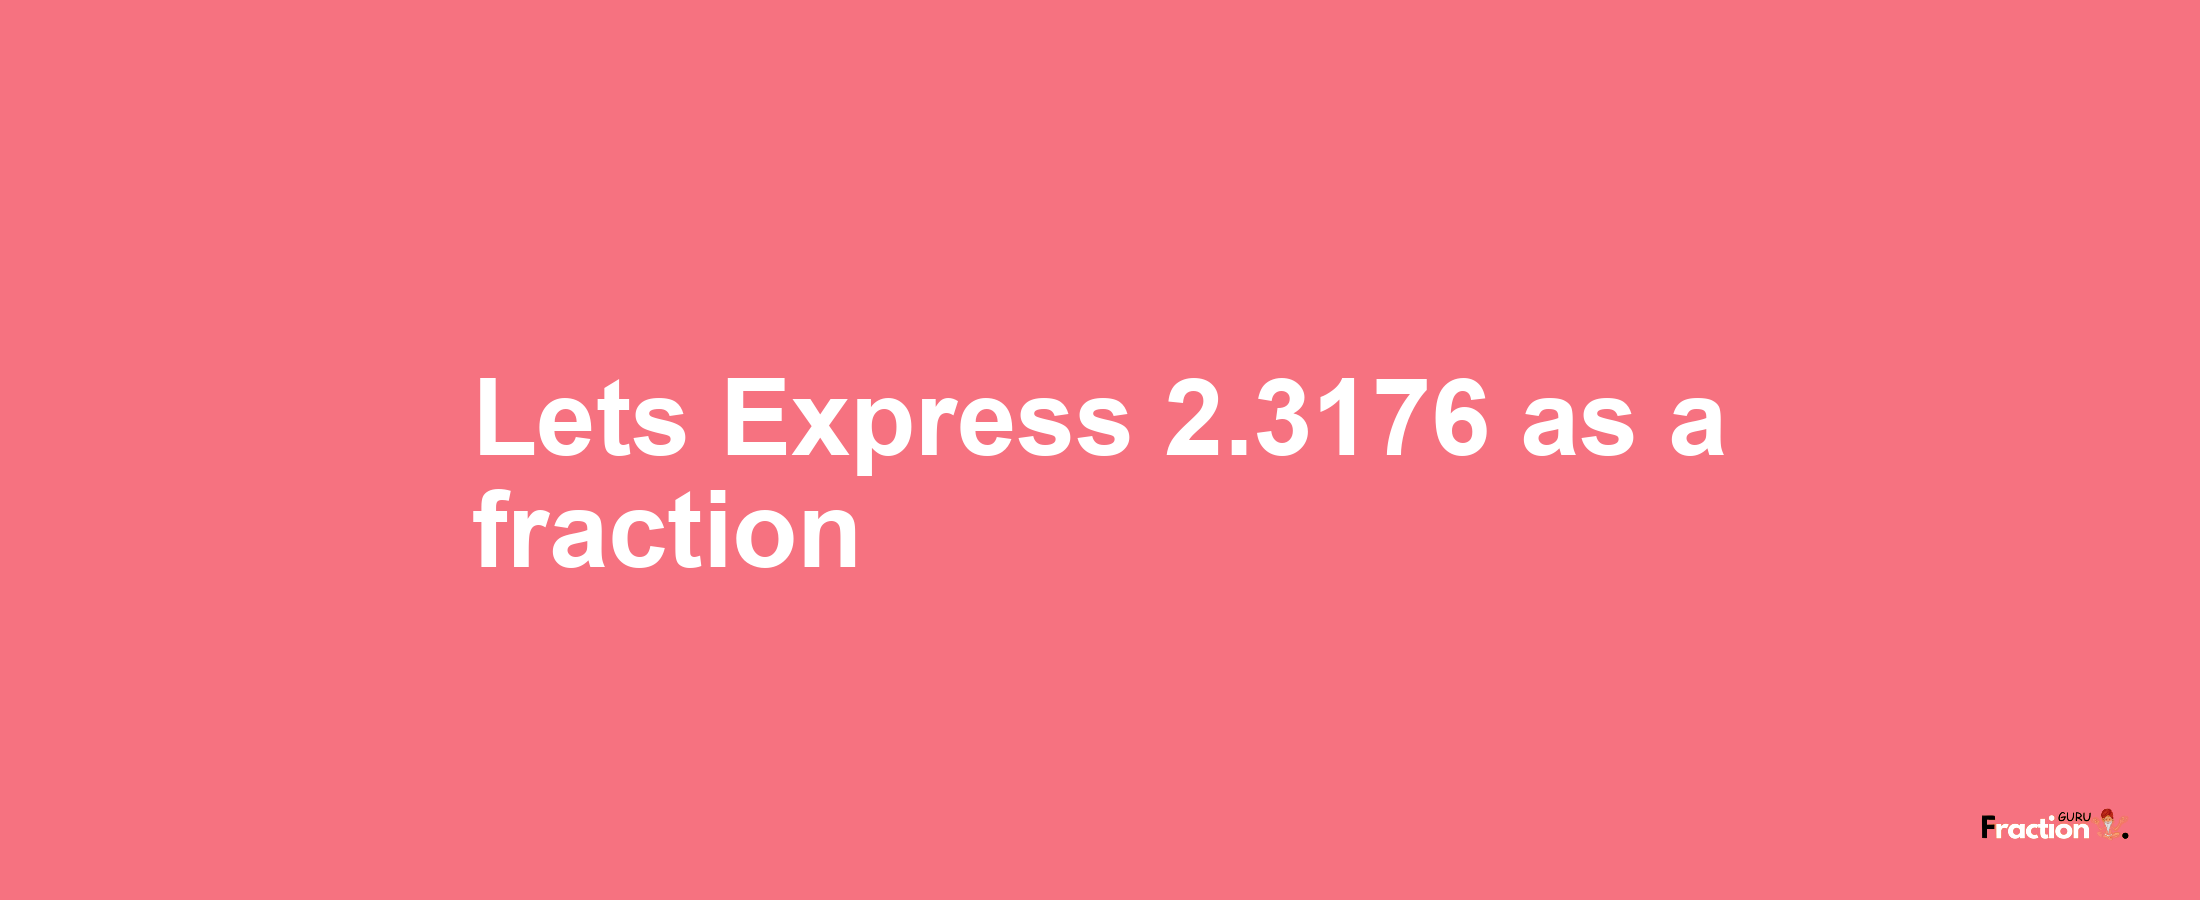 Lets Express 2.3176 as afraction